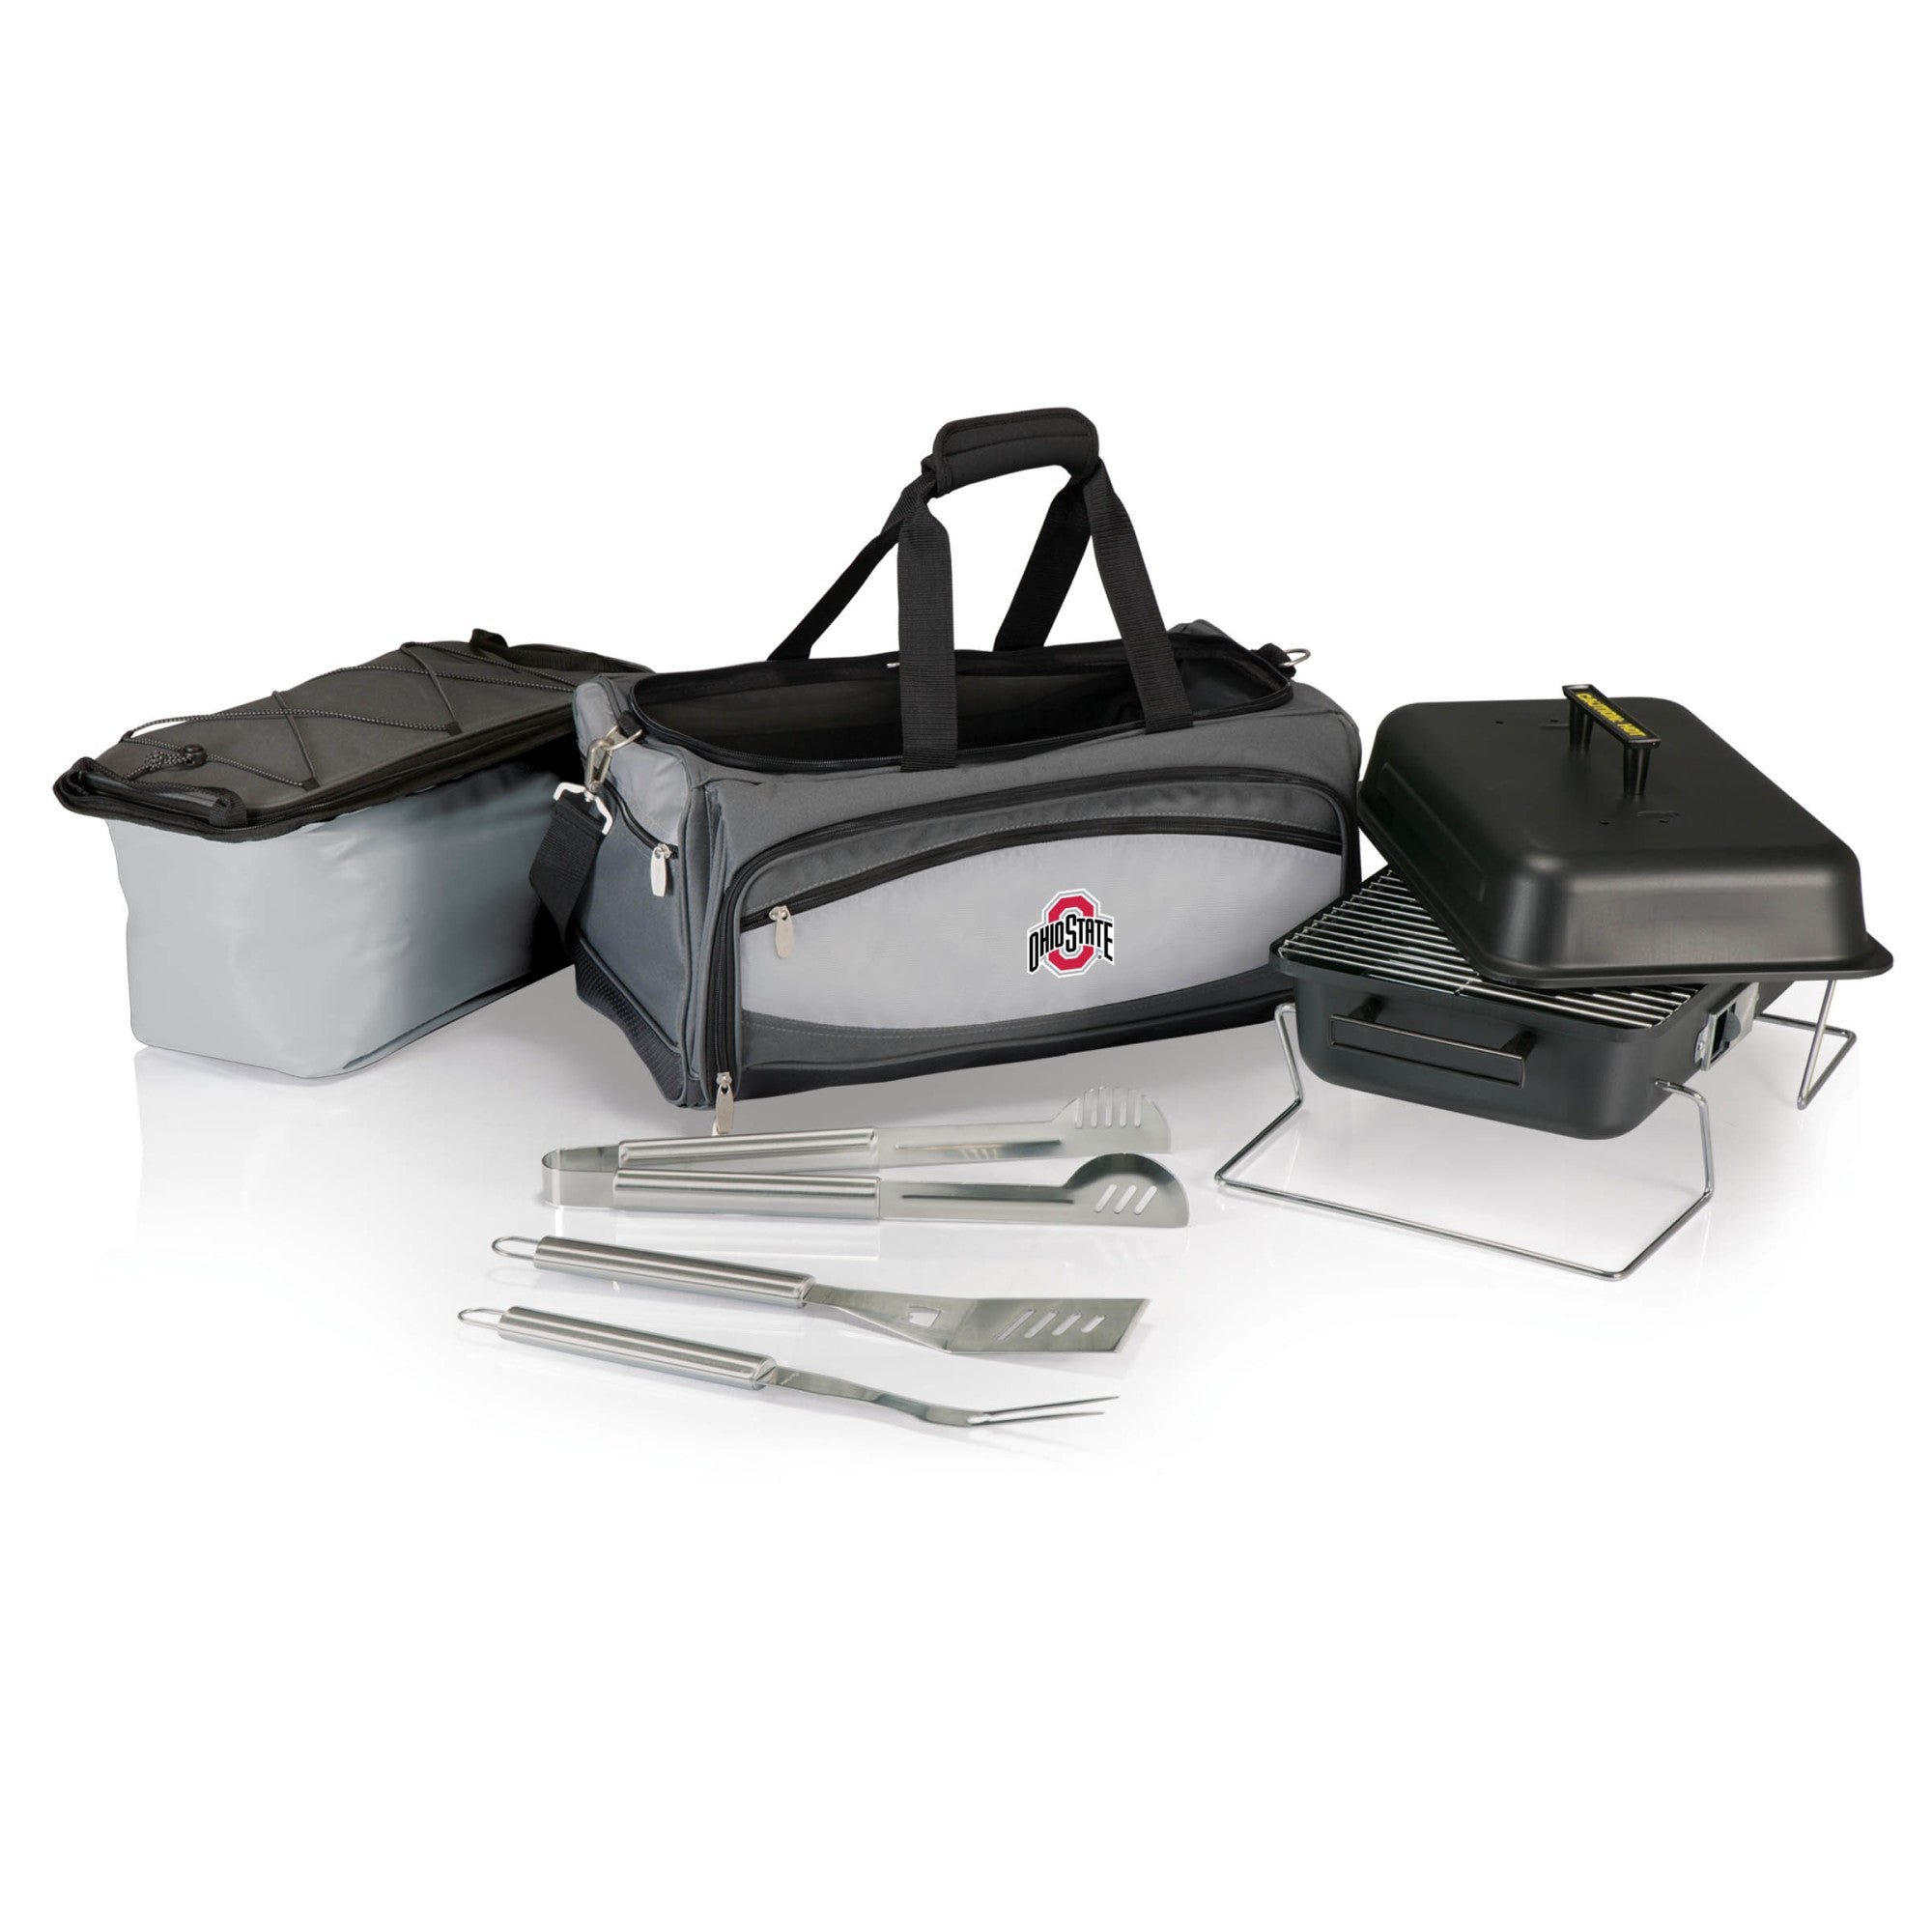 Ohio State Buckeyes - Buccaneer Portable Charcoal Grill & Cooler Tote